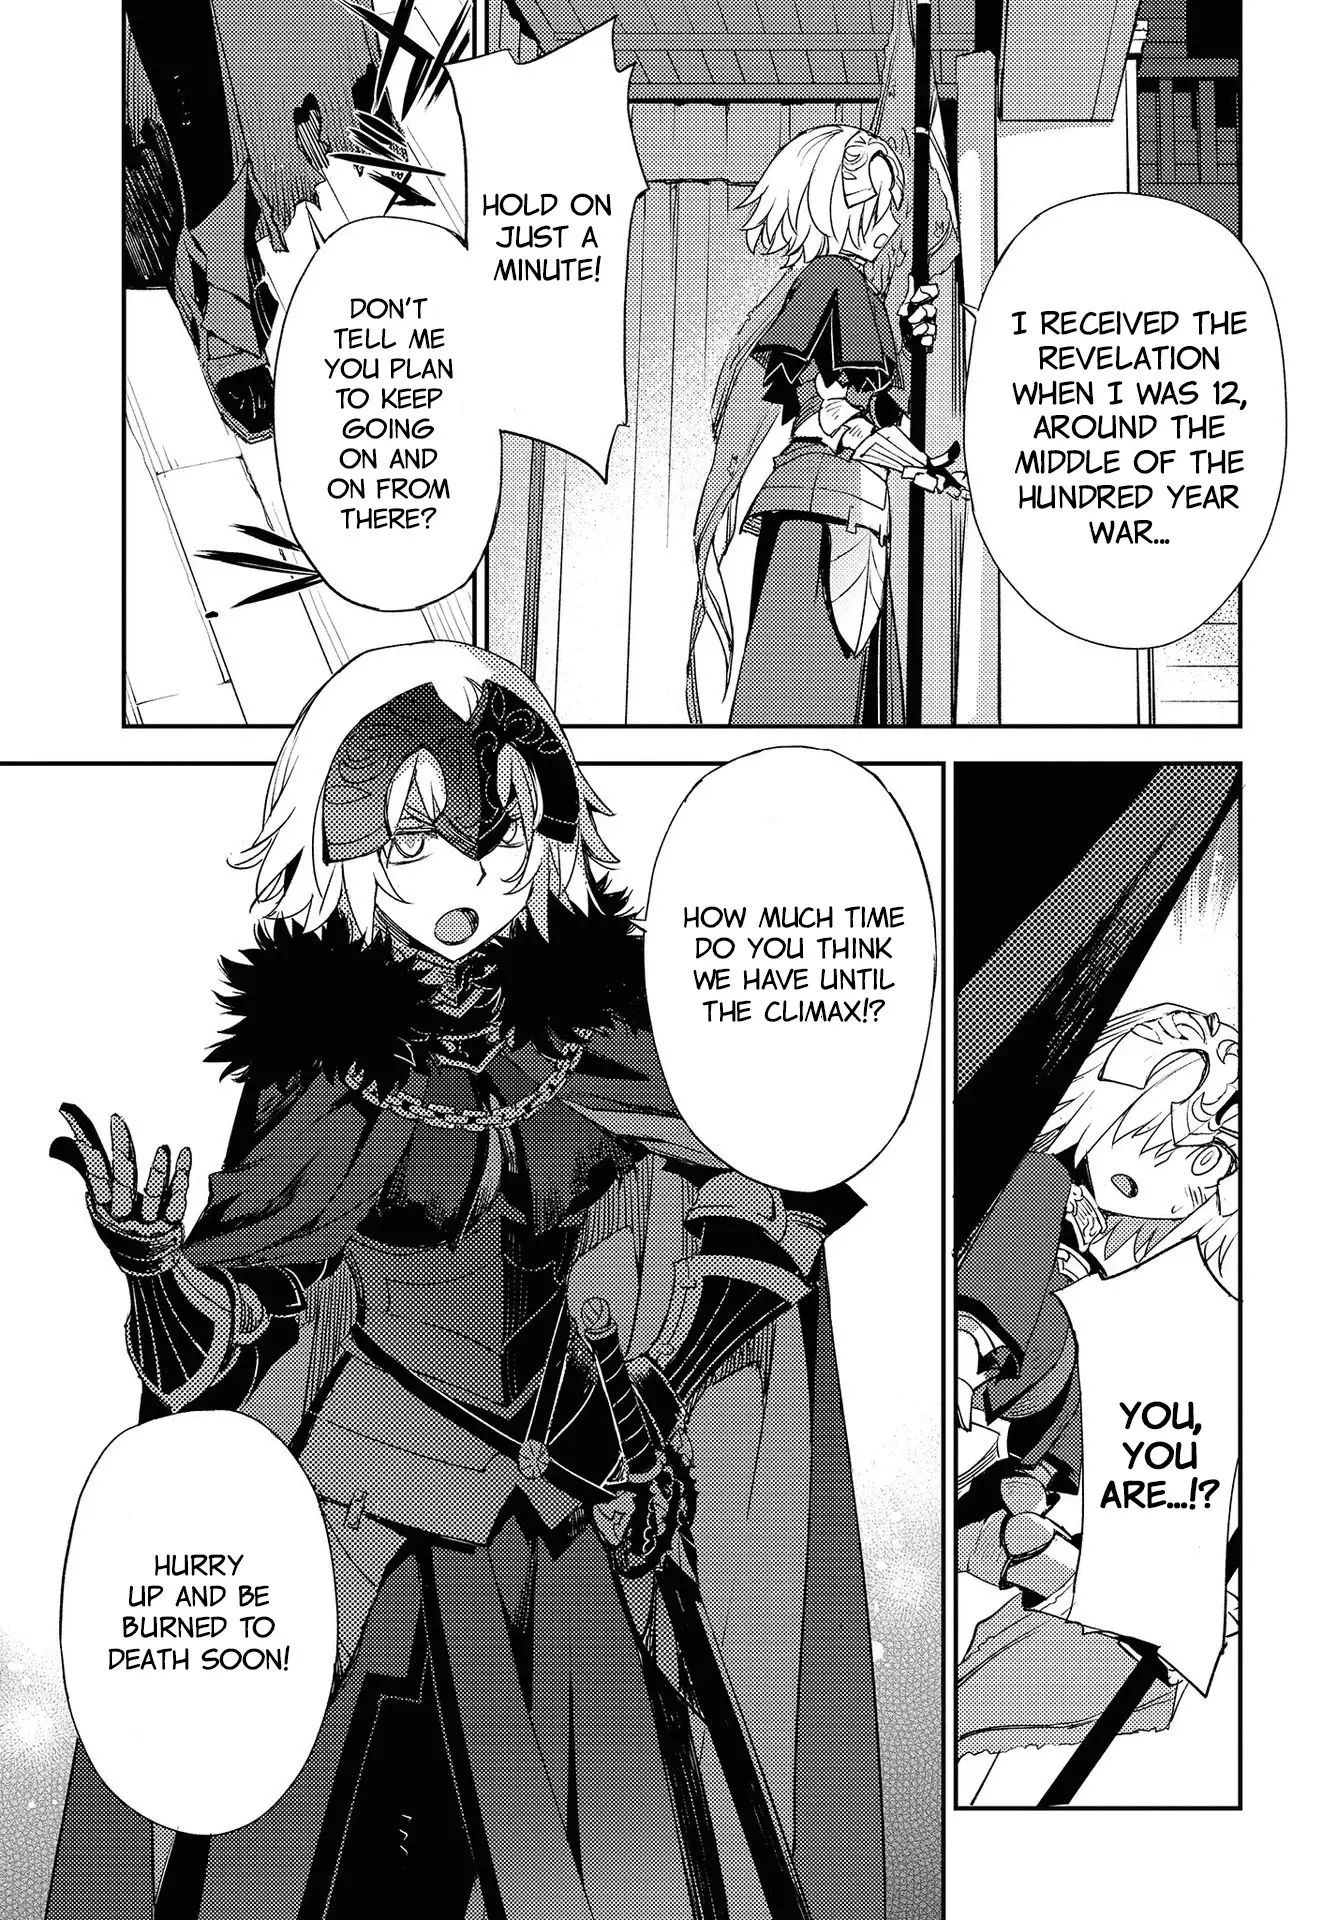 Fate/grand Order: Epic Of Remnant - Subspecies Singularity Iv: Taboo Advent Salem: Salem Of Heresy - 13 page 18